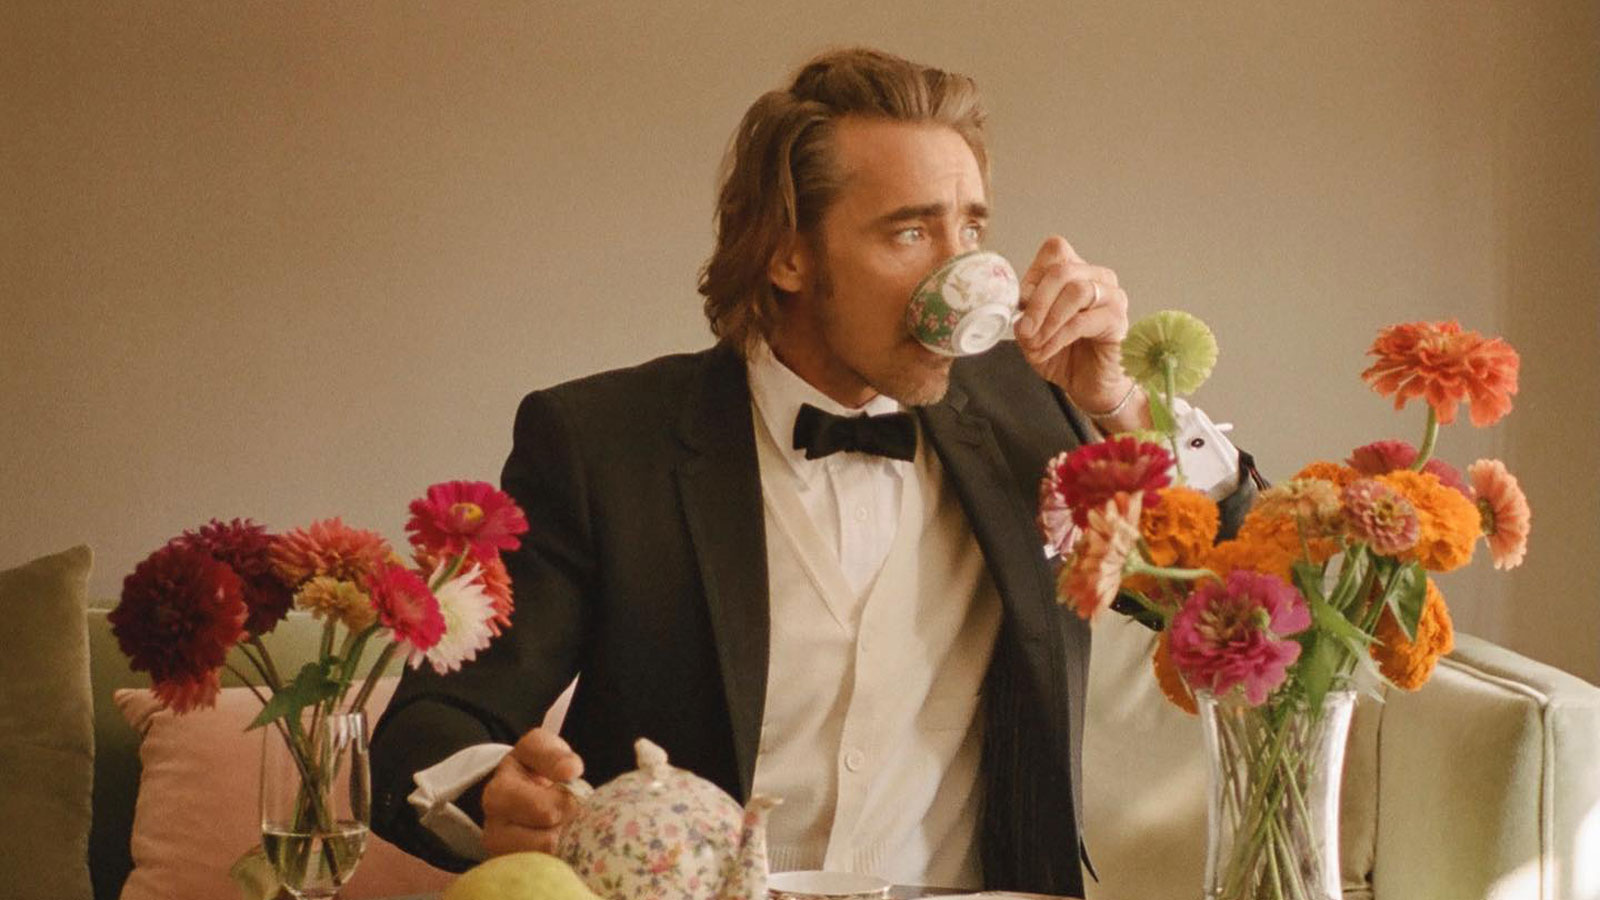 Who Is Lee Pace? Movies, Boyfriend, *That* Viral Pic & More